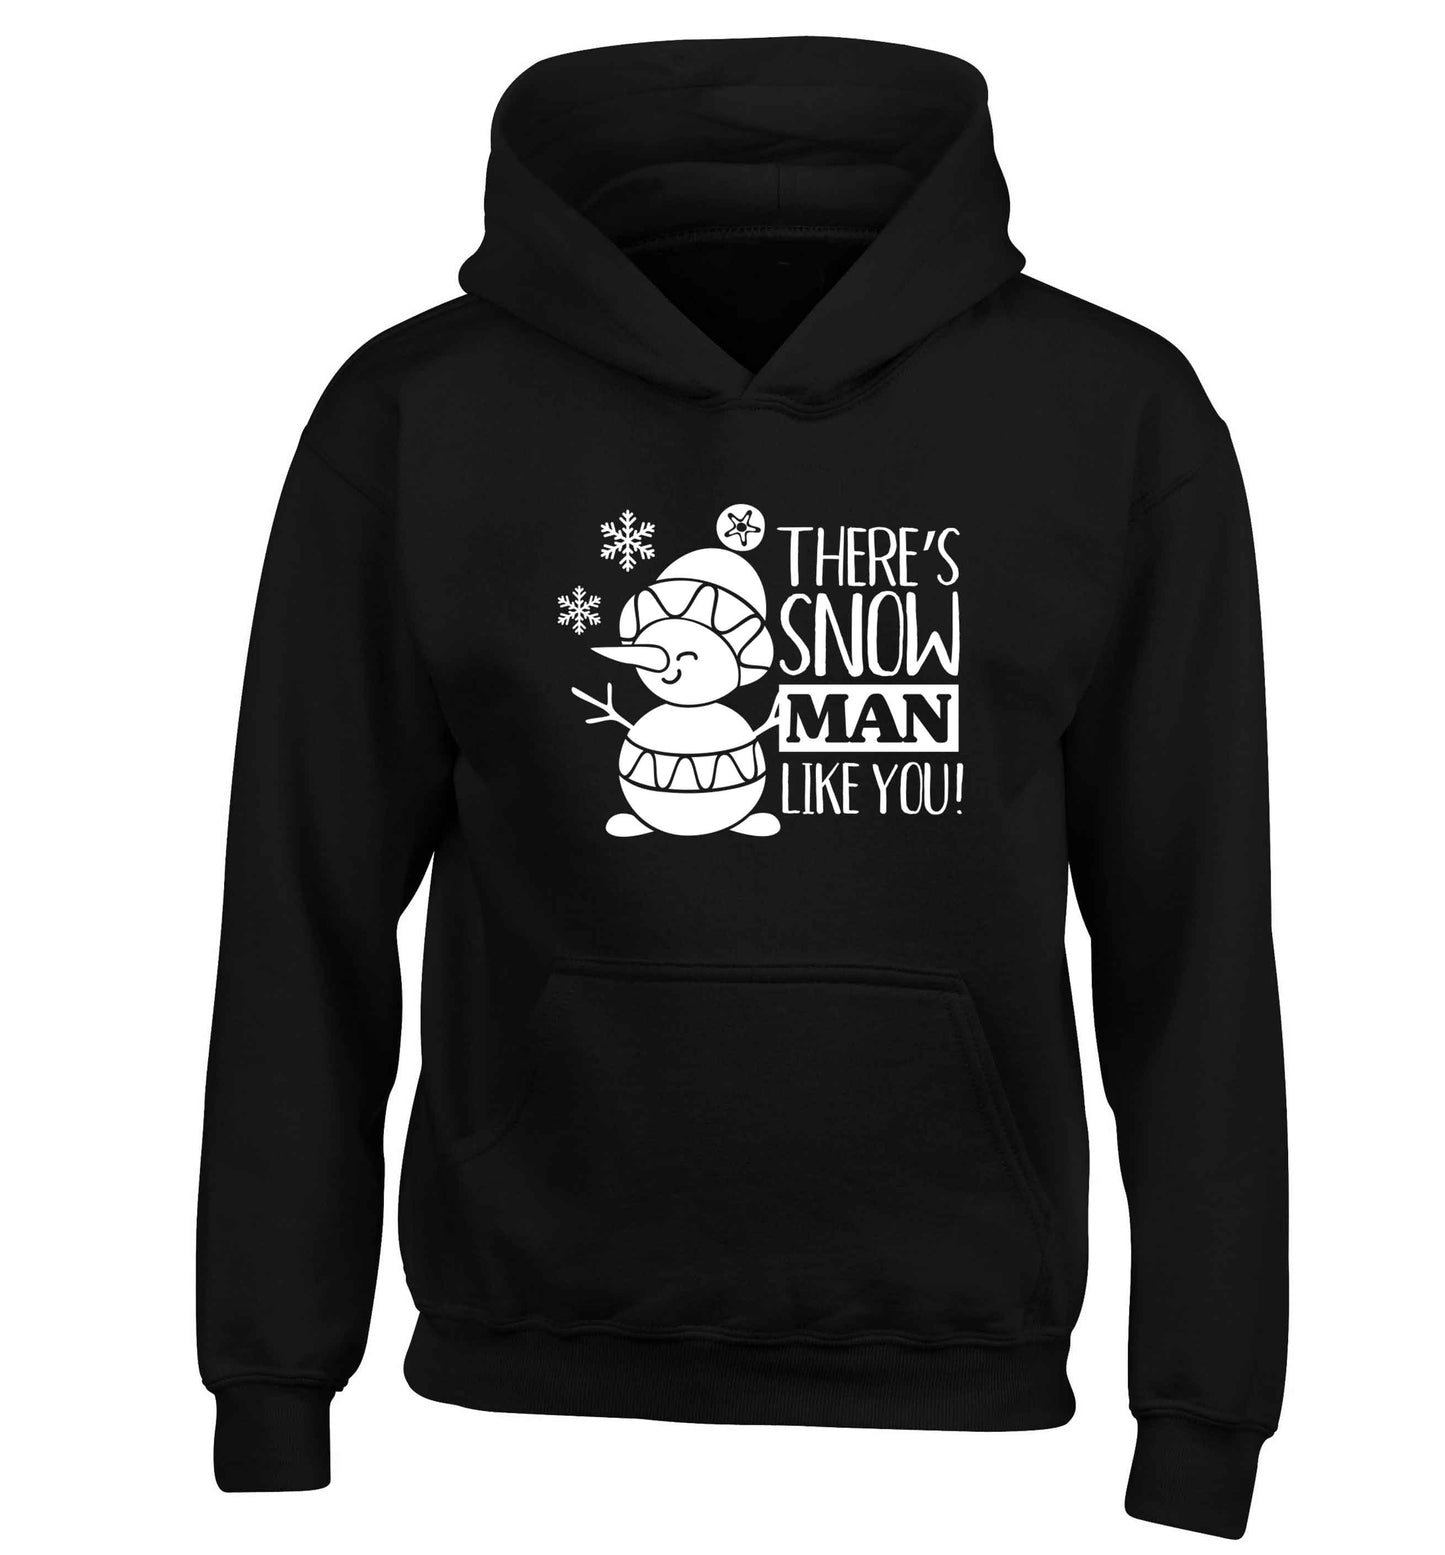 There's snow man like you children's black hoodie 12-13 Years